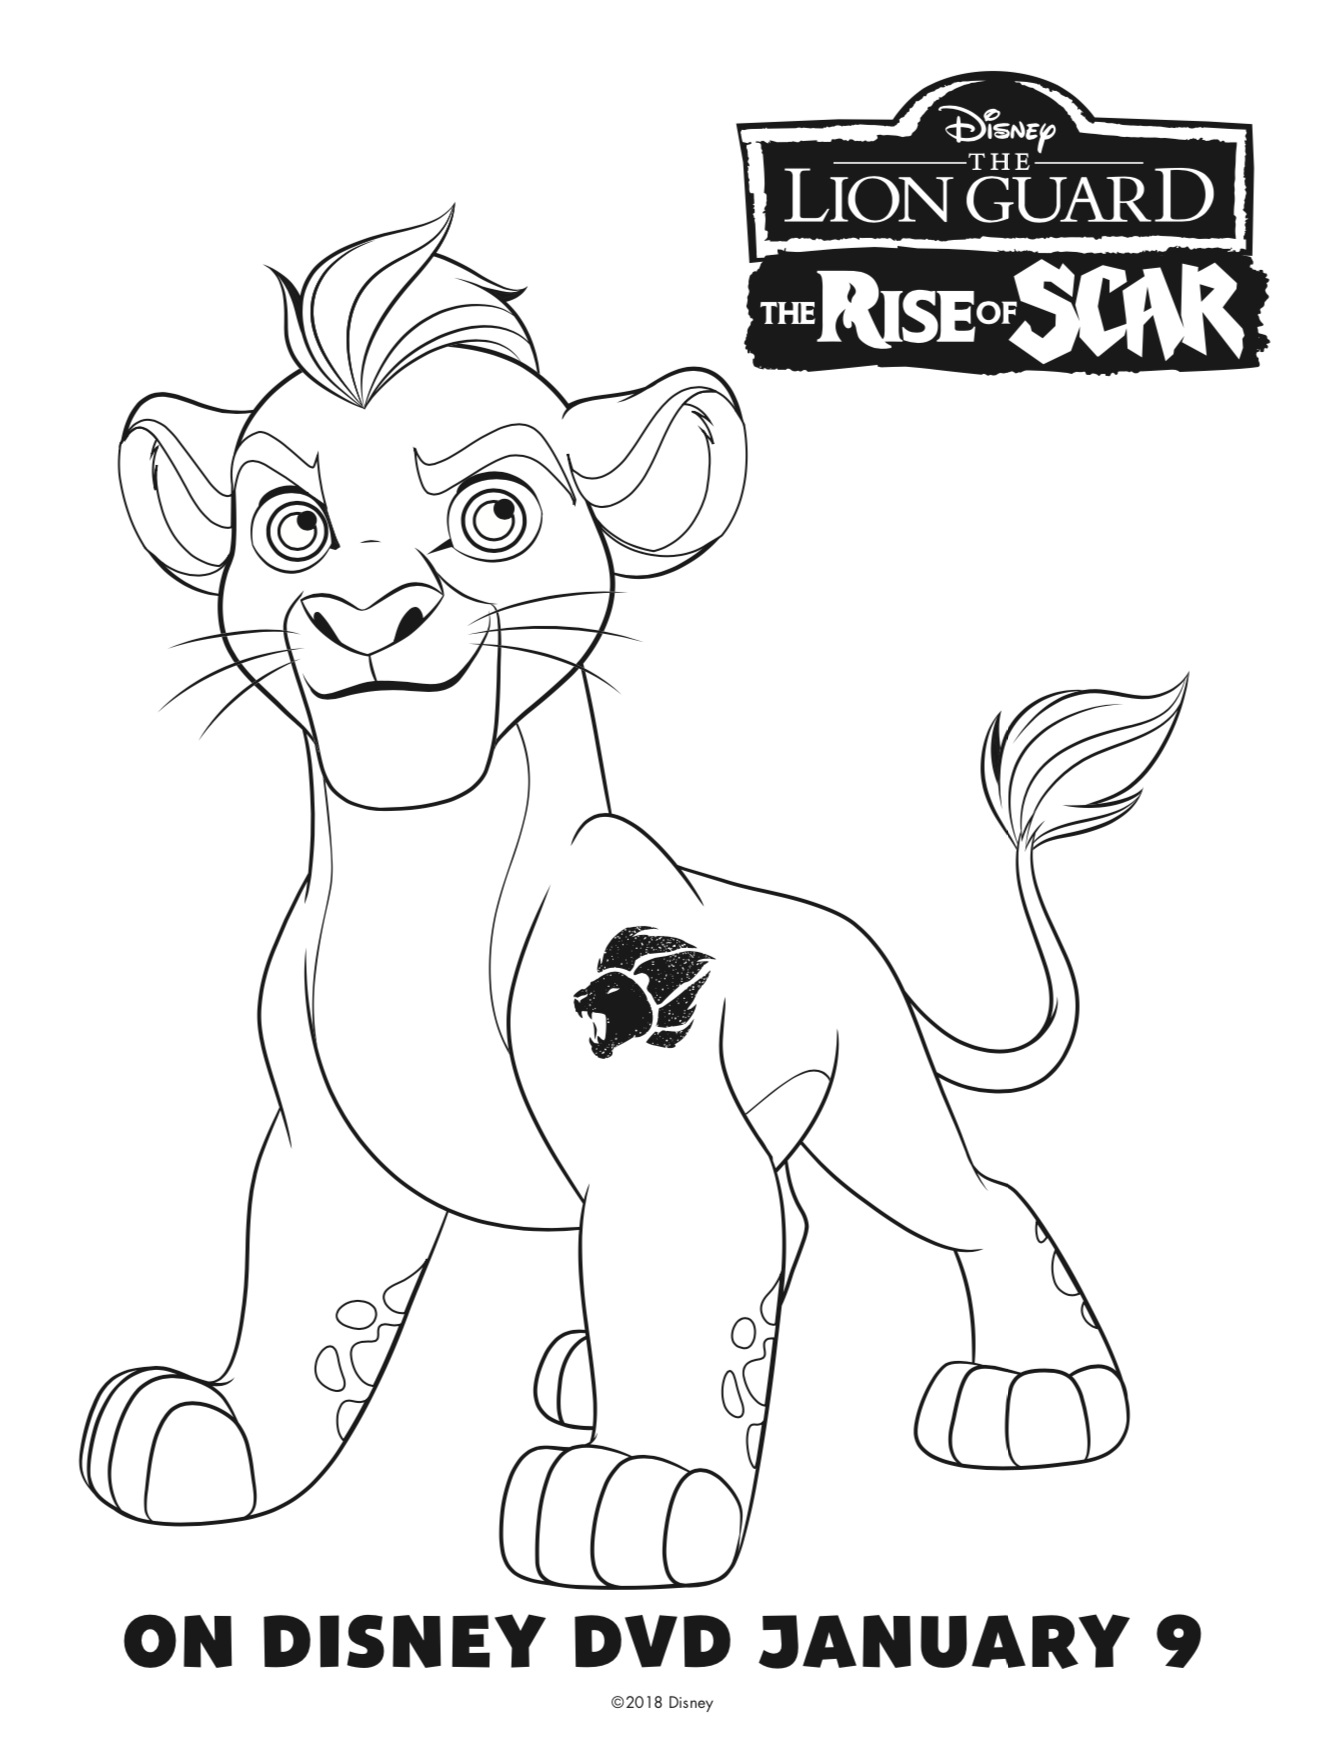 Free Printable Disney The Lion Guard Coloring Pages + Activity Sheets -  Life. Family. Joy